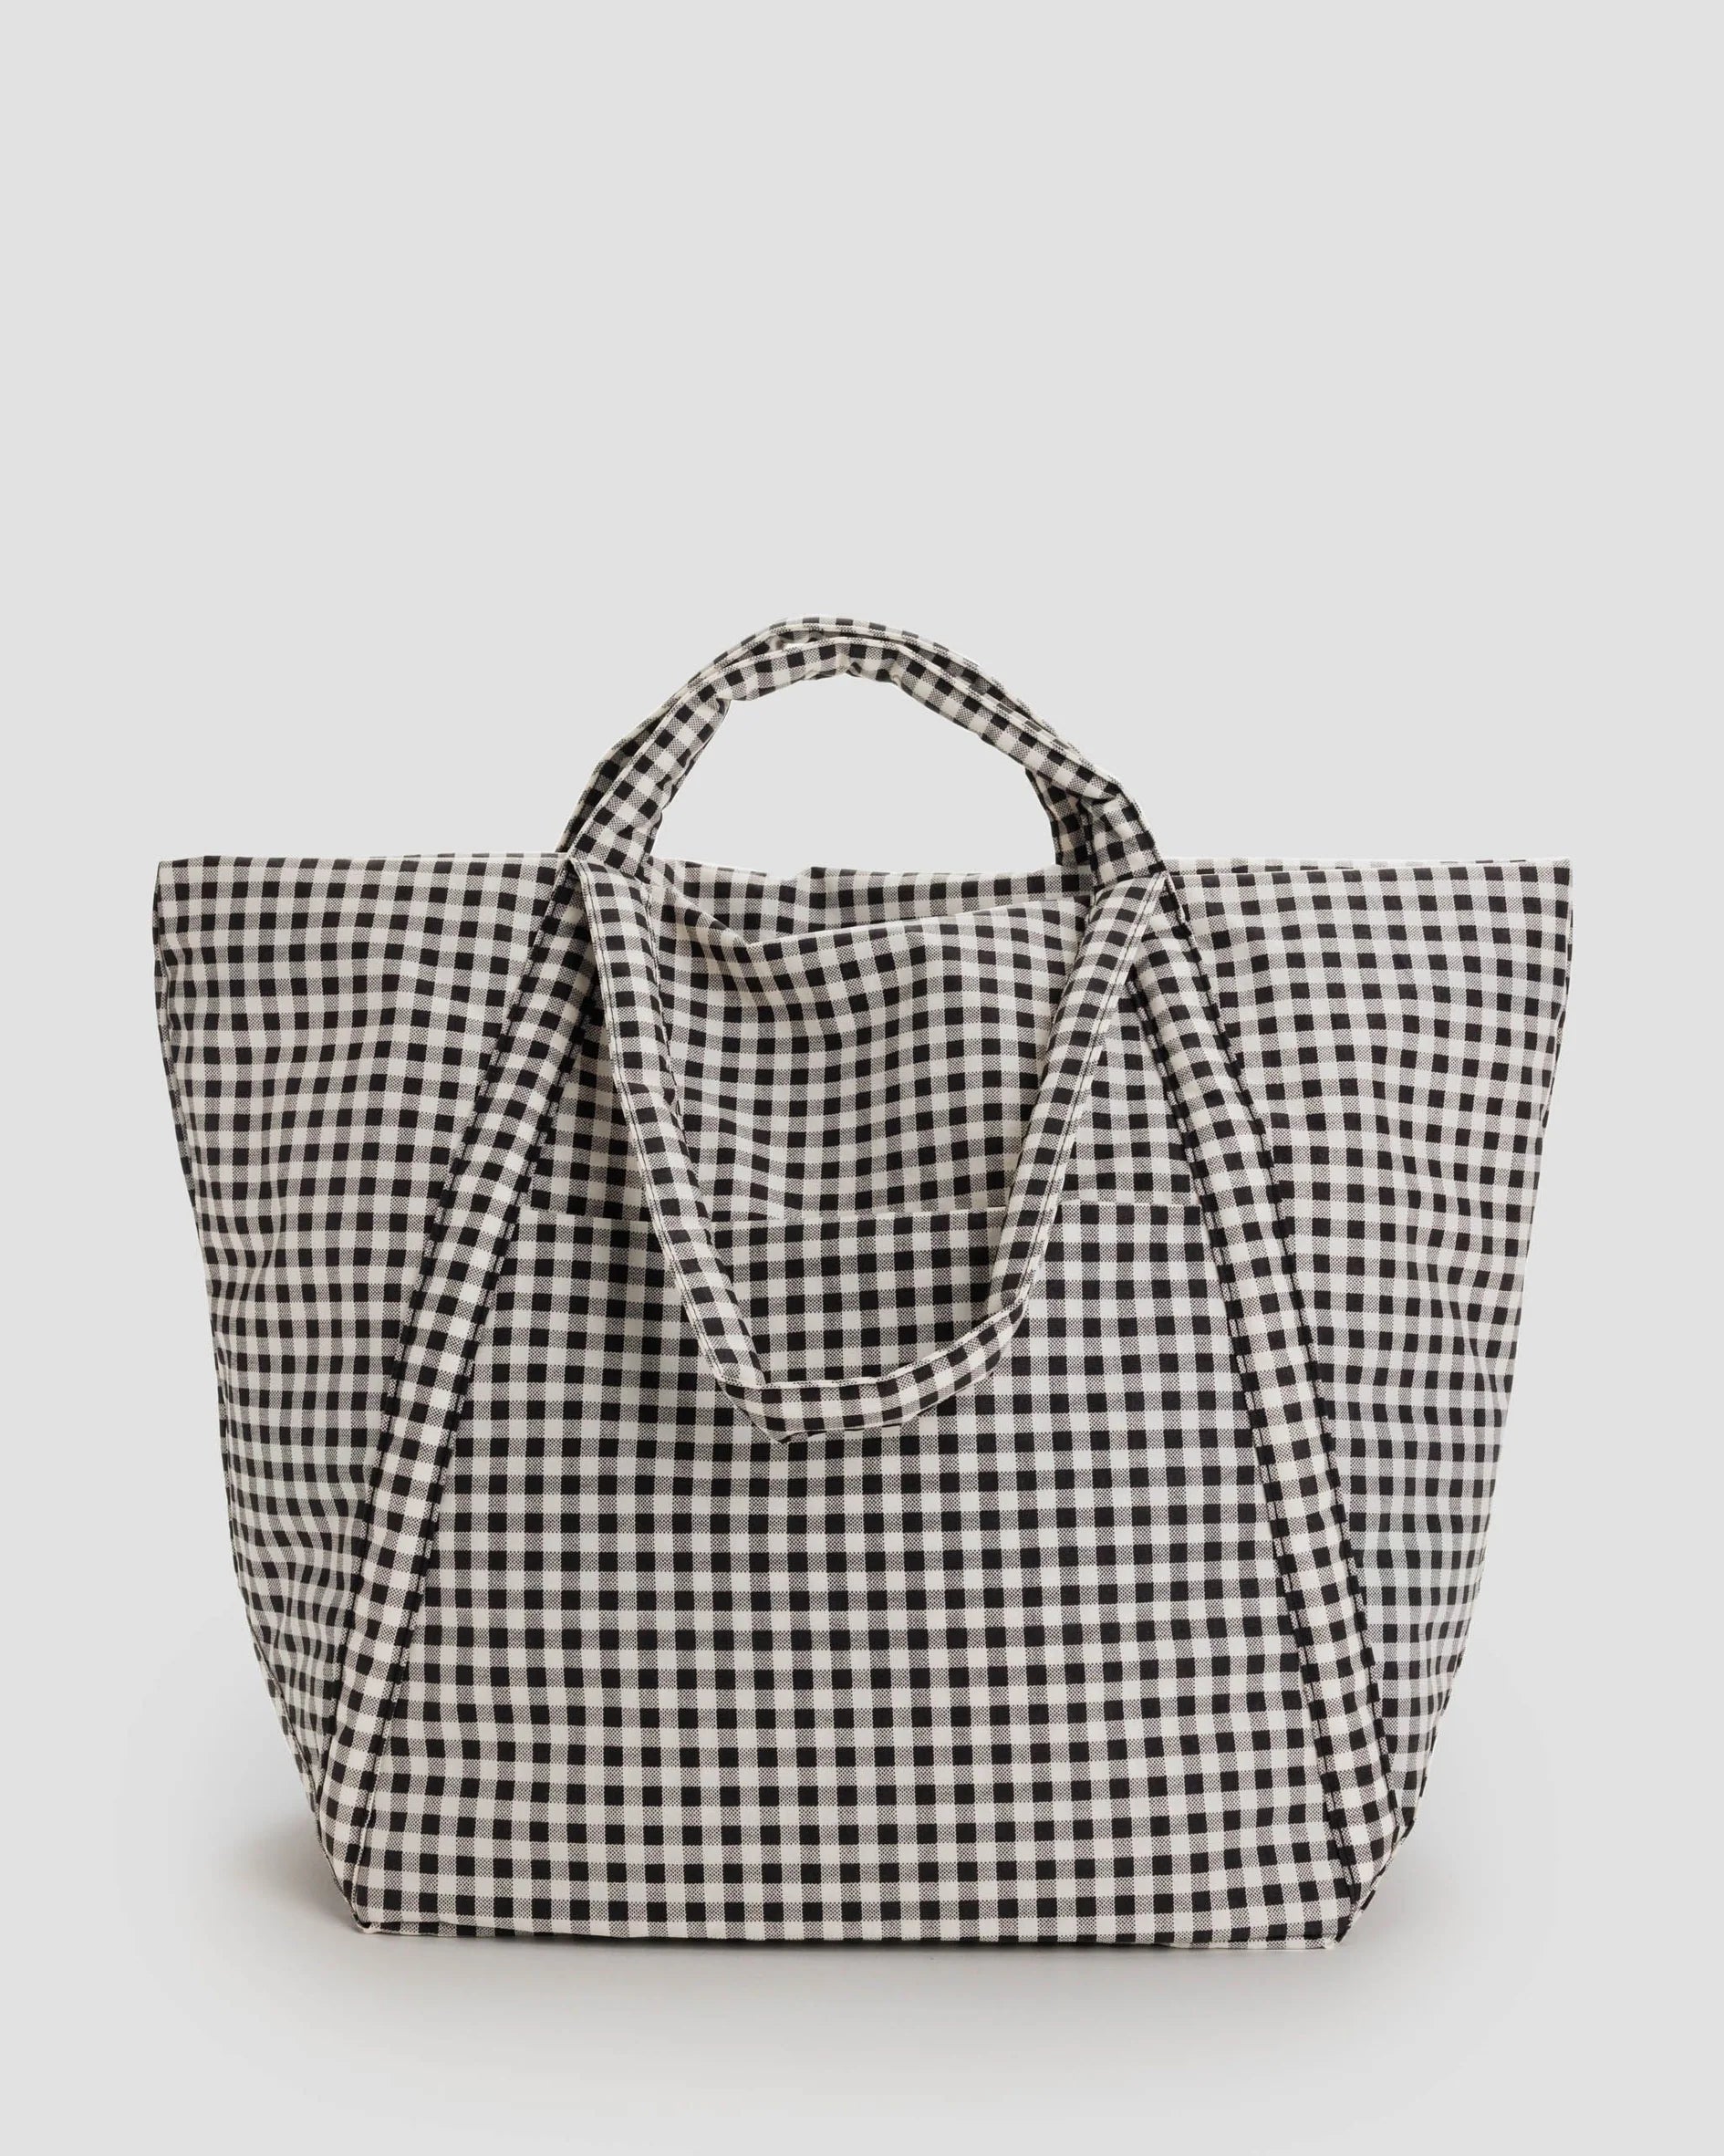 Baggu Travel Cloud Bag-Black & White Gingham | Collective Request 